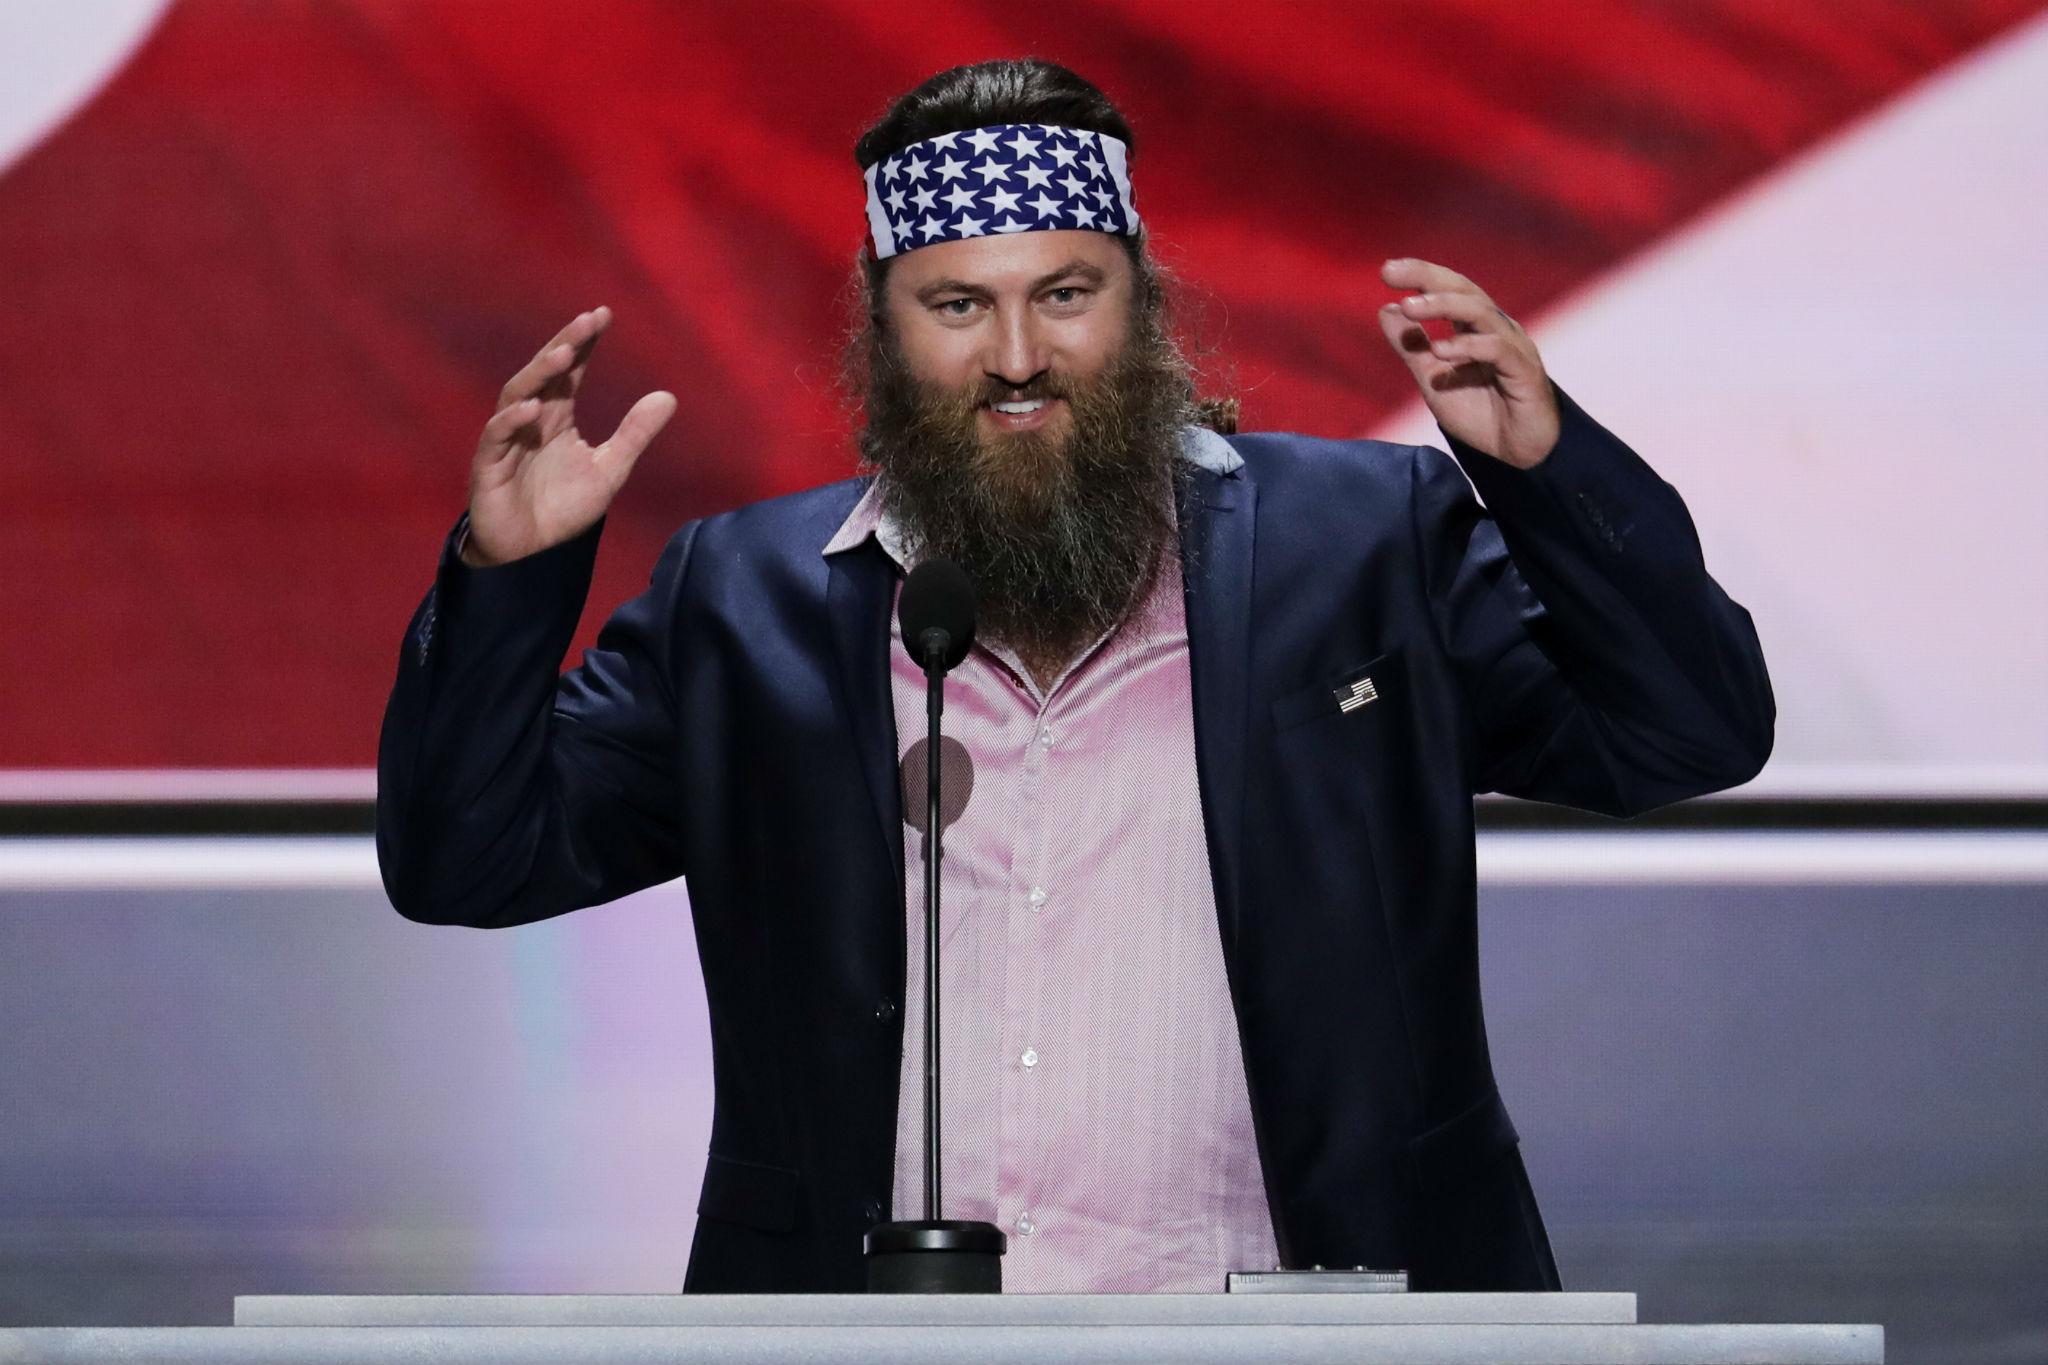 Duck Dynasty star Willie Robertson boasted of having boarded the 'Trump train' early (AP)